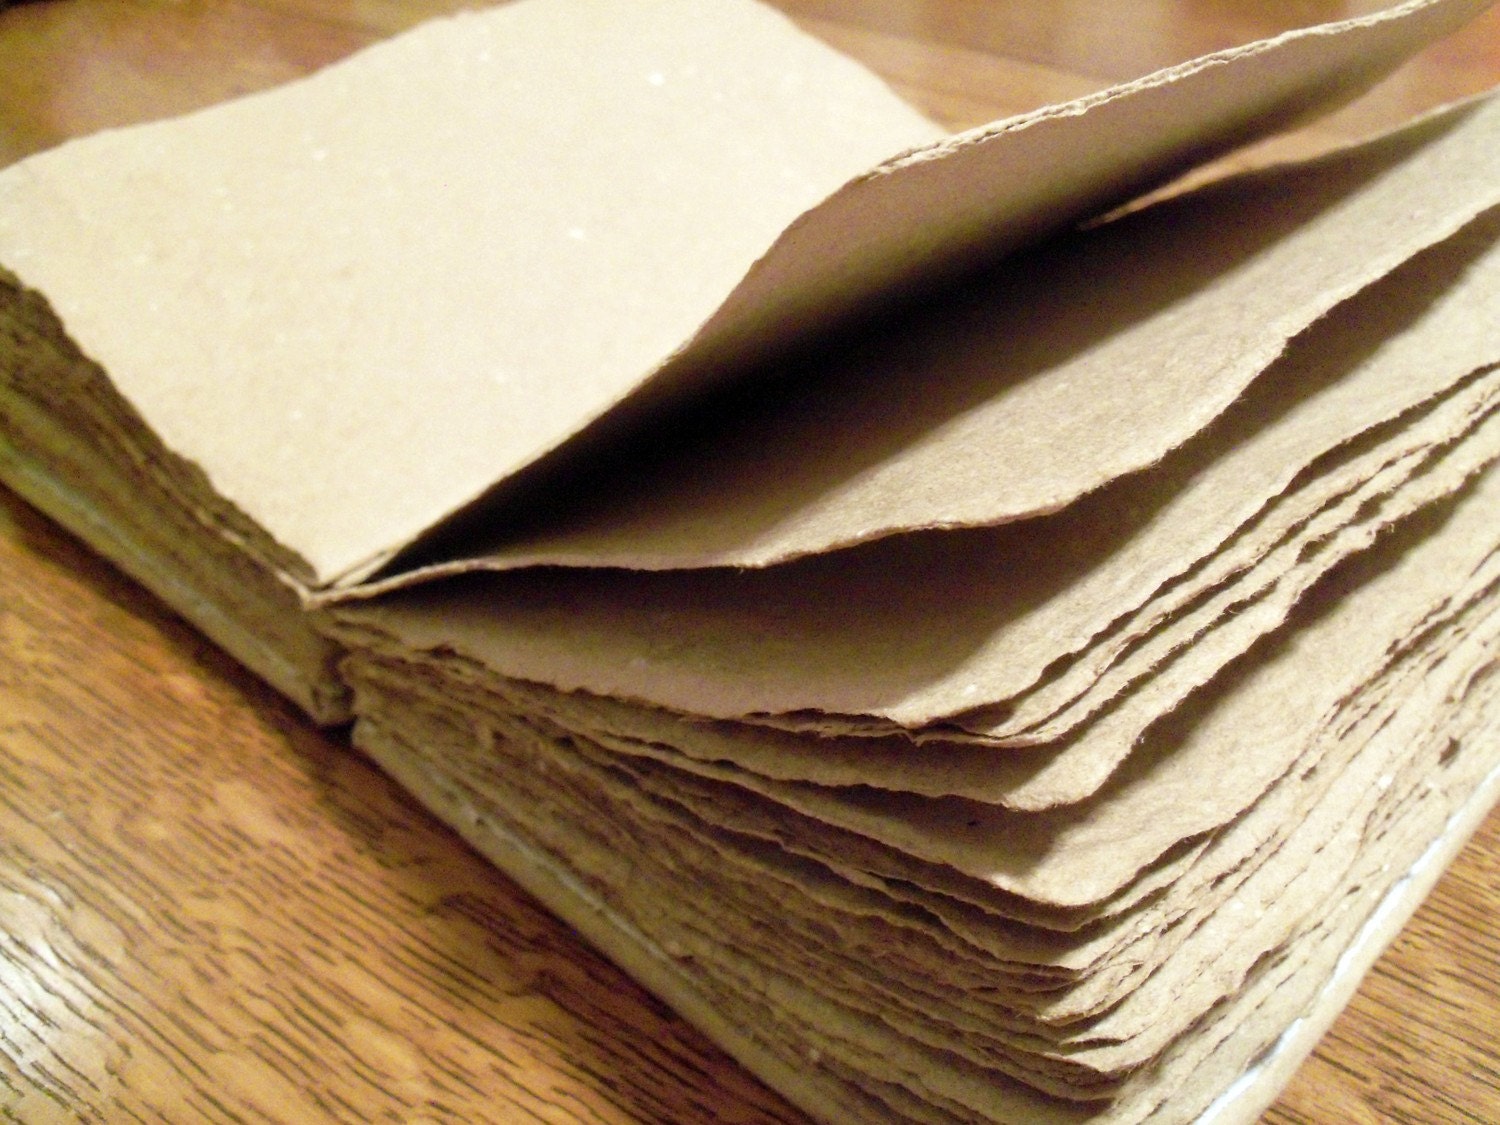 Brown recycled journal with handmade paper pages